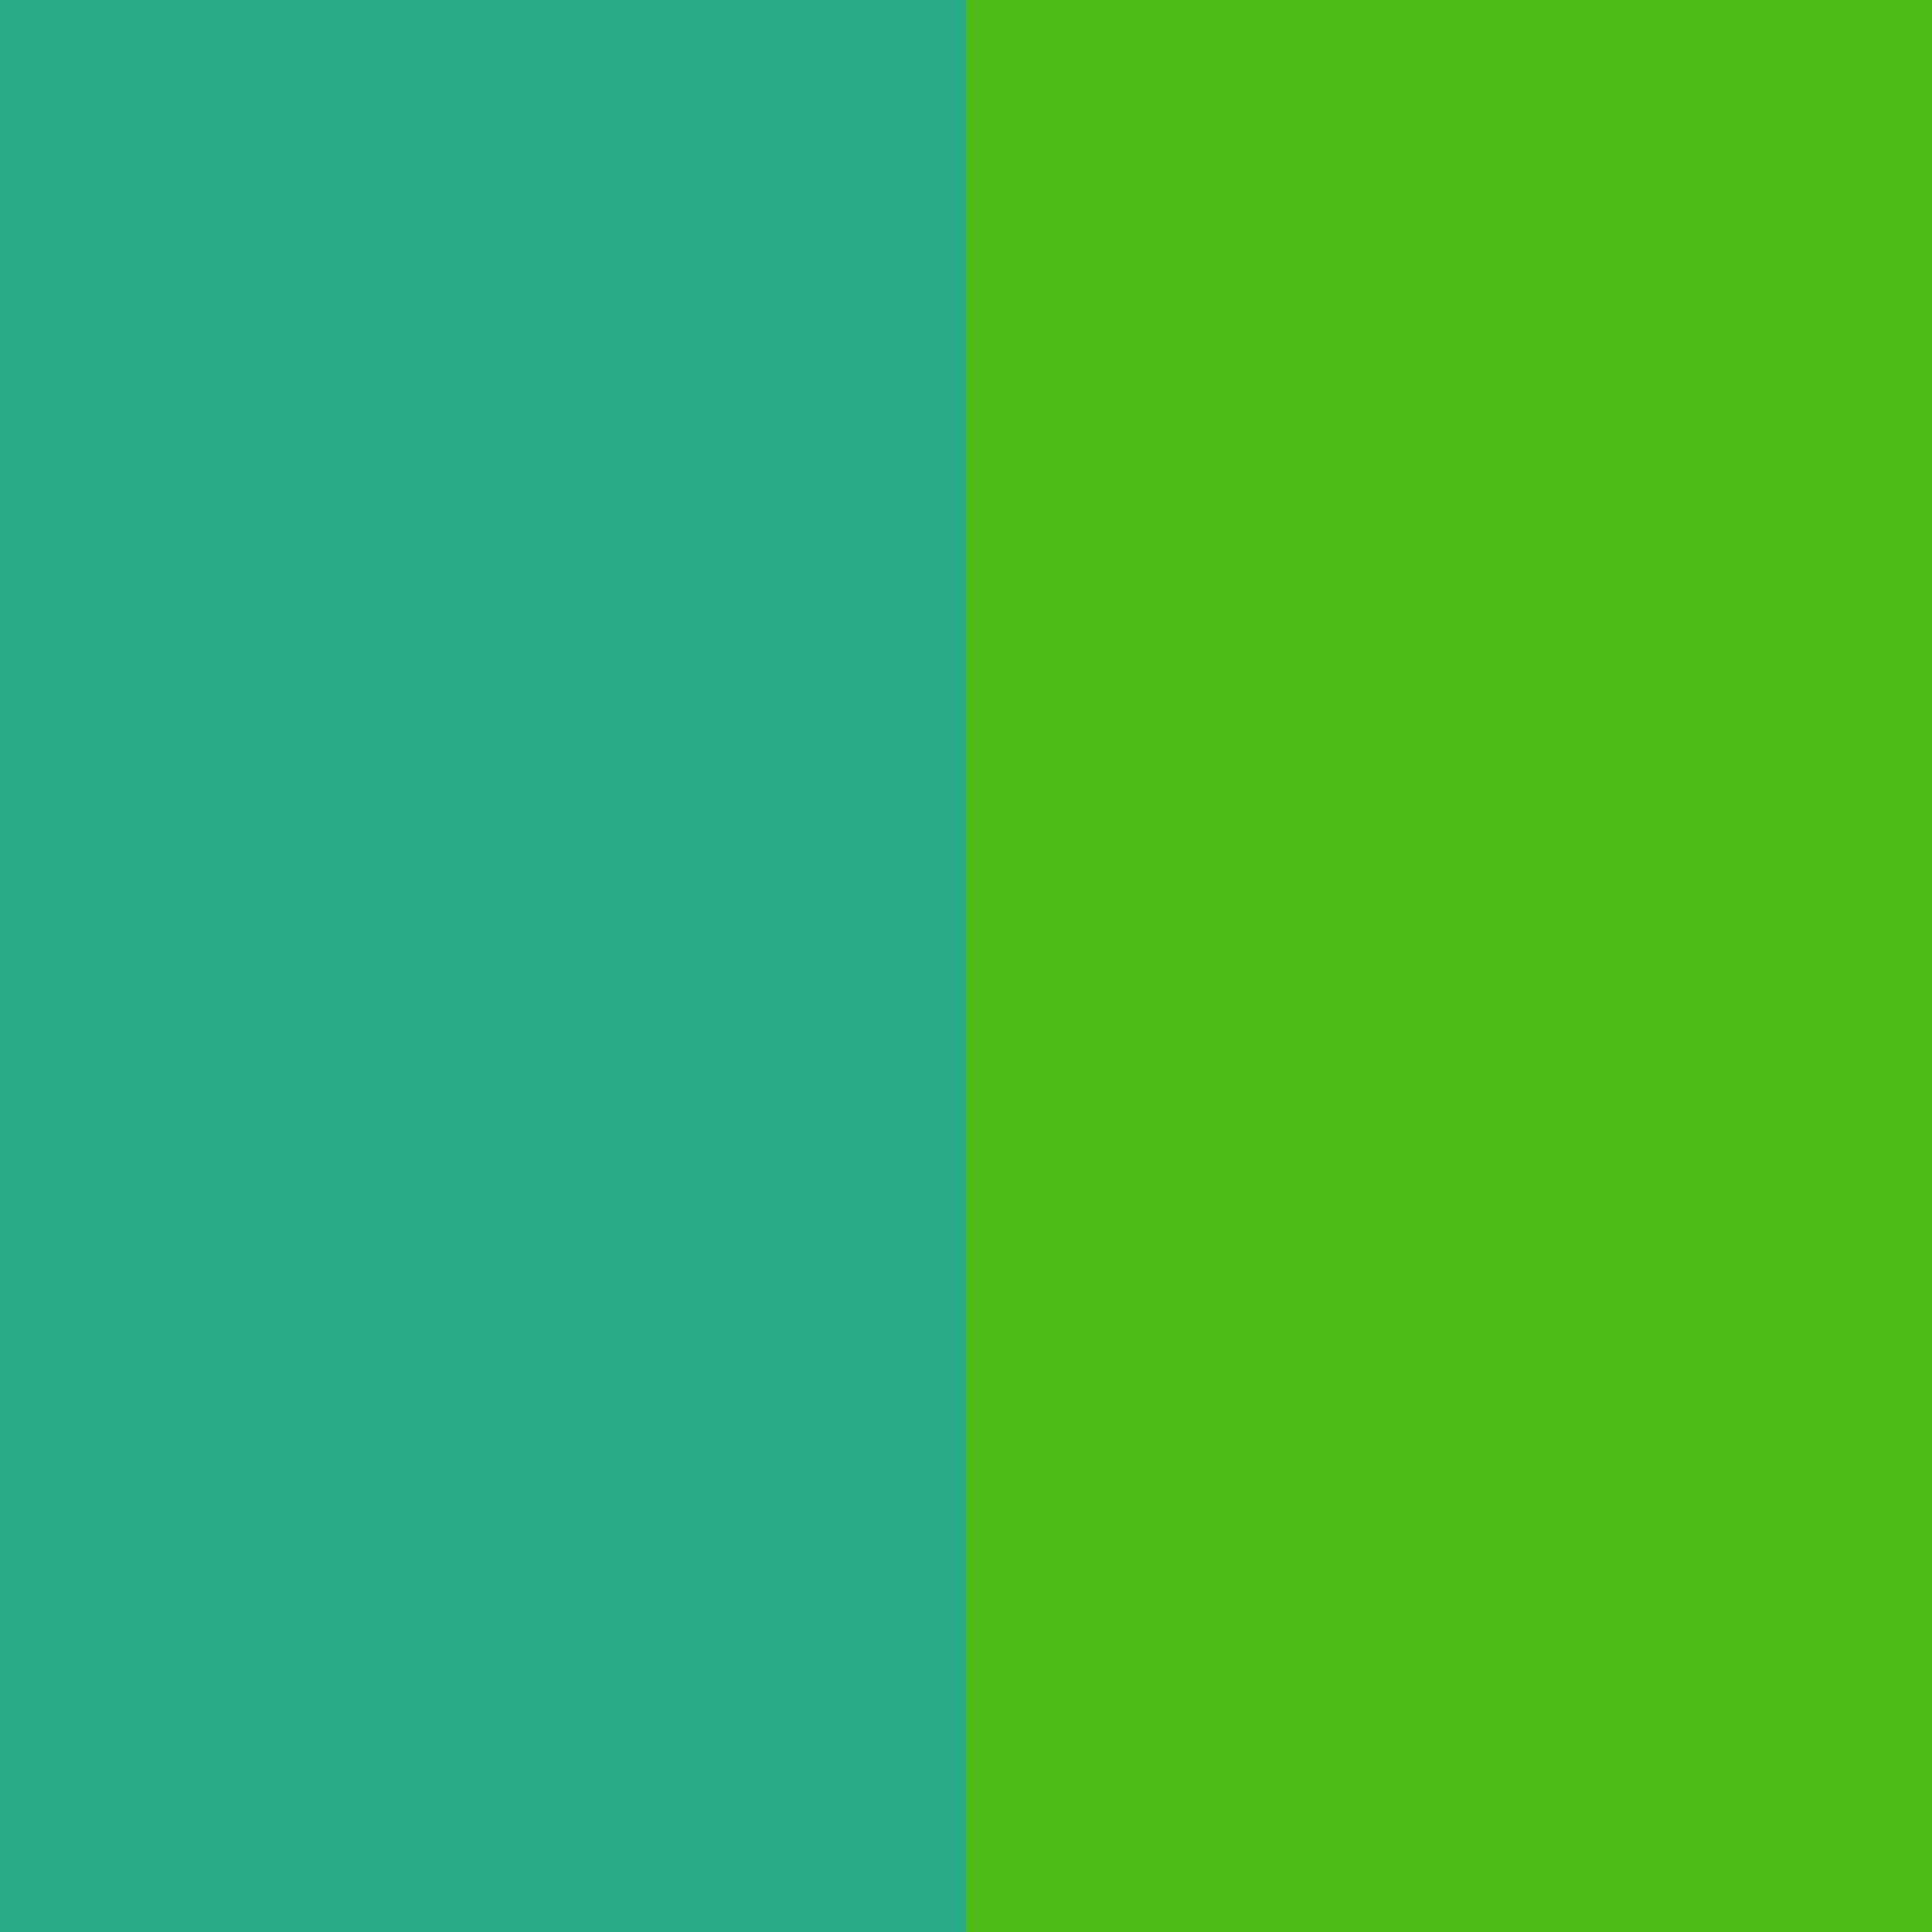 Free 2048x2048 resolution Jungle Green and Kelly Green solid two color